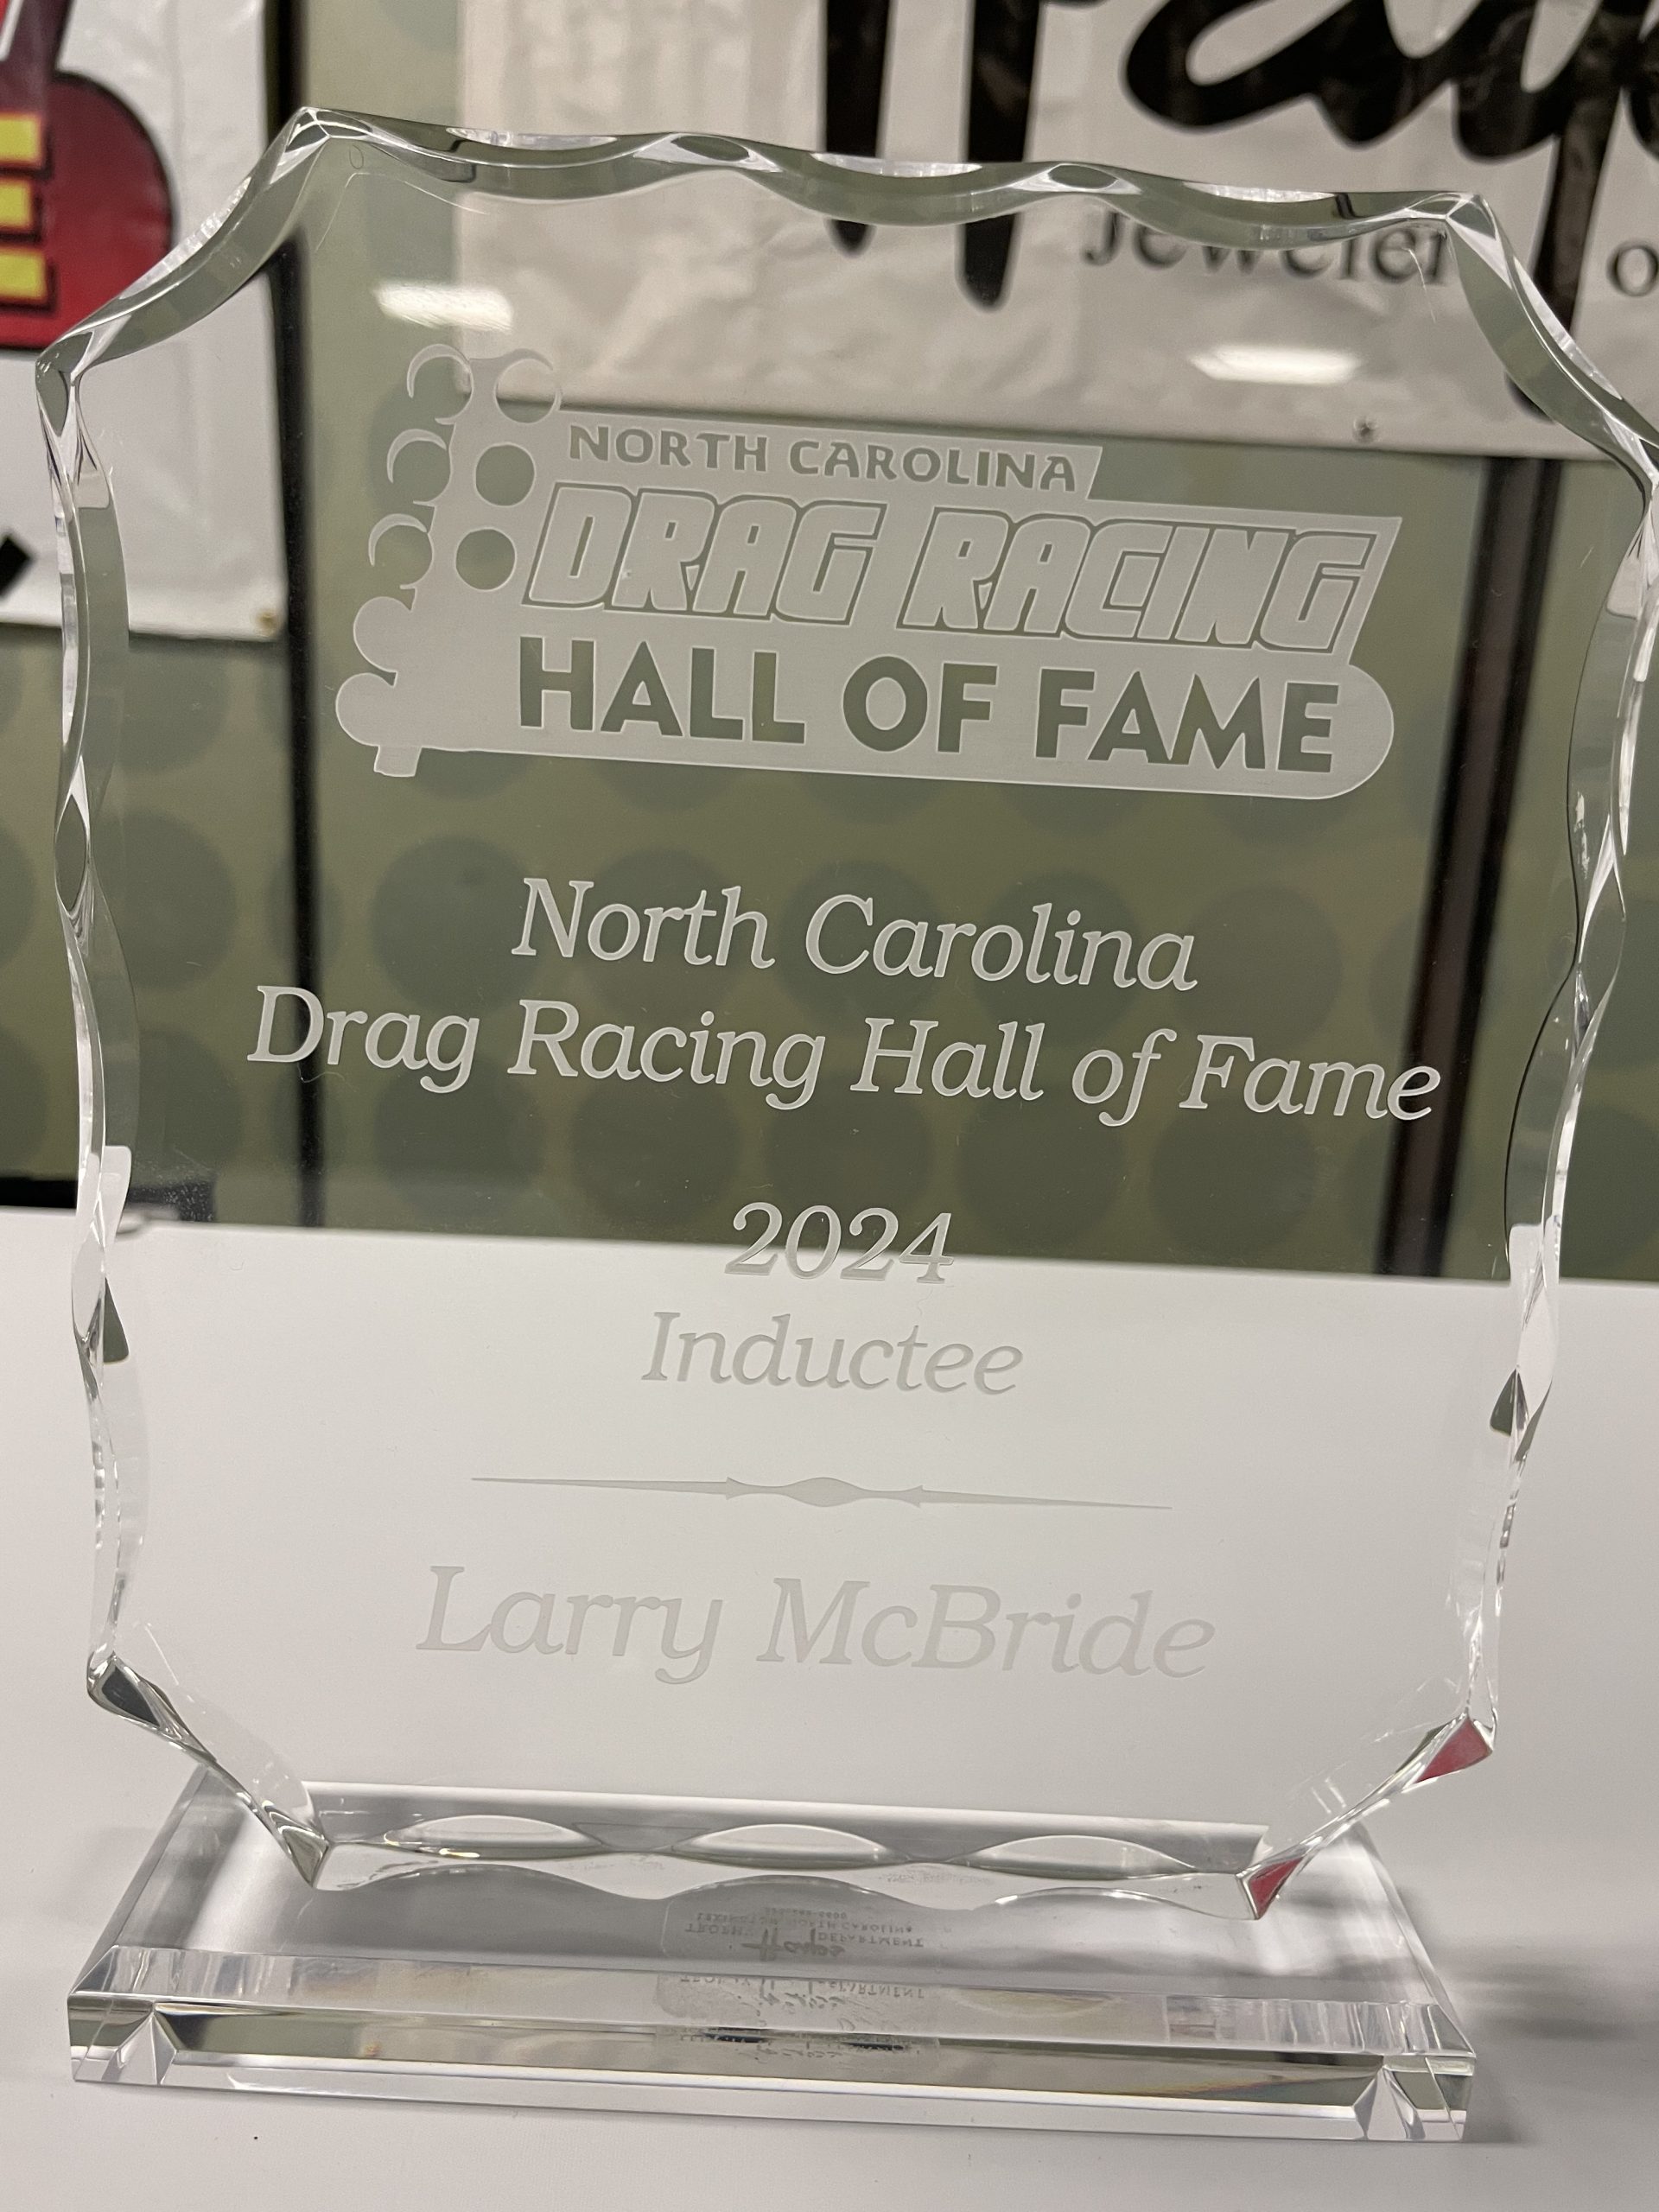 Larry "Spiderman" McBride Hall of Fame Induction Ceremony